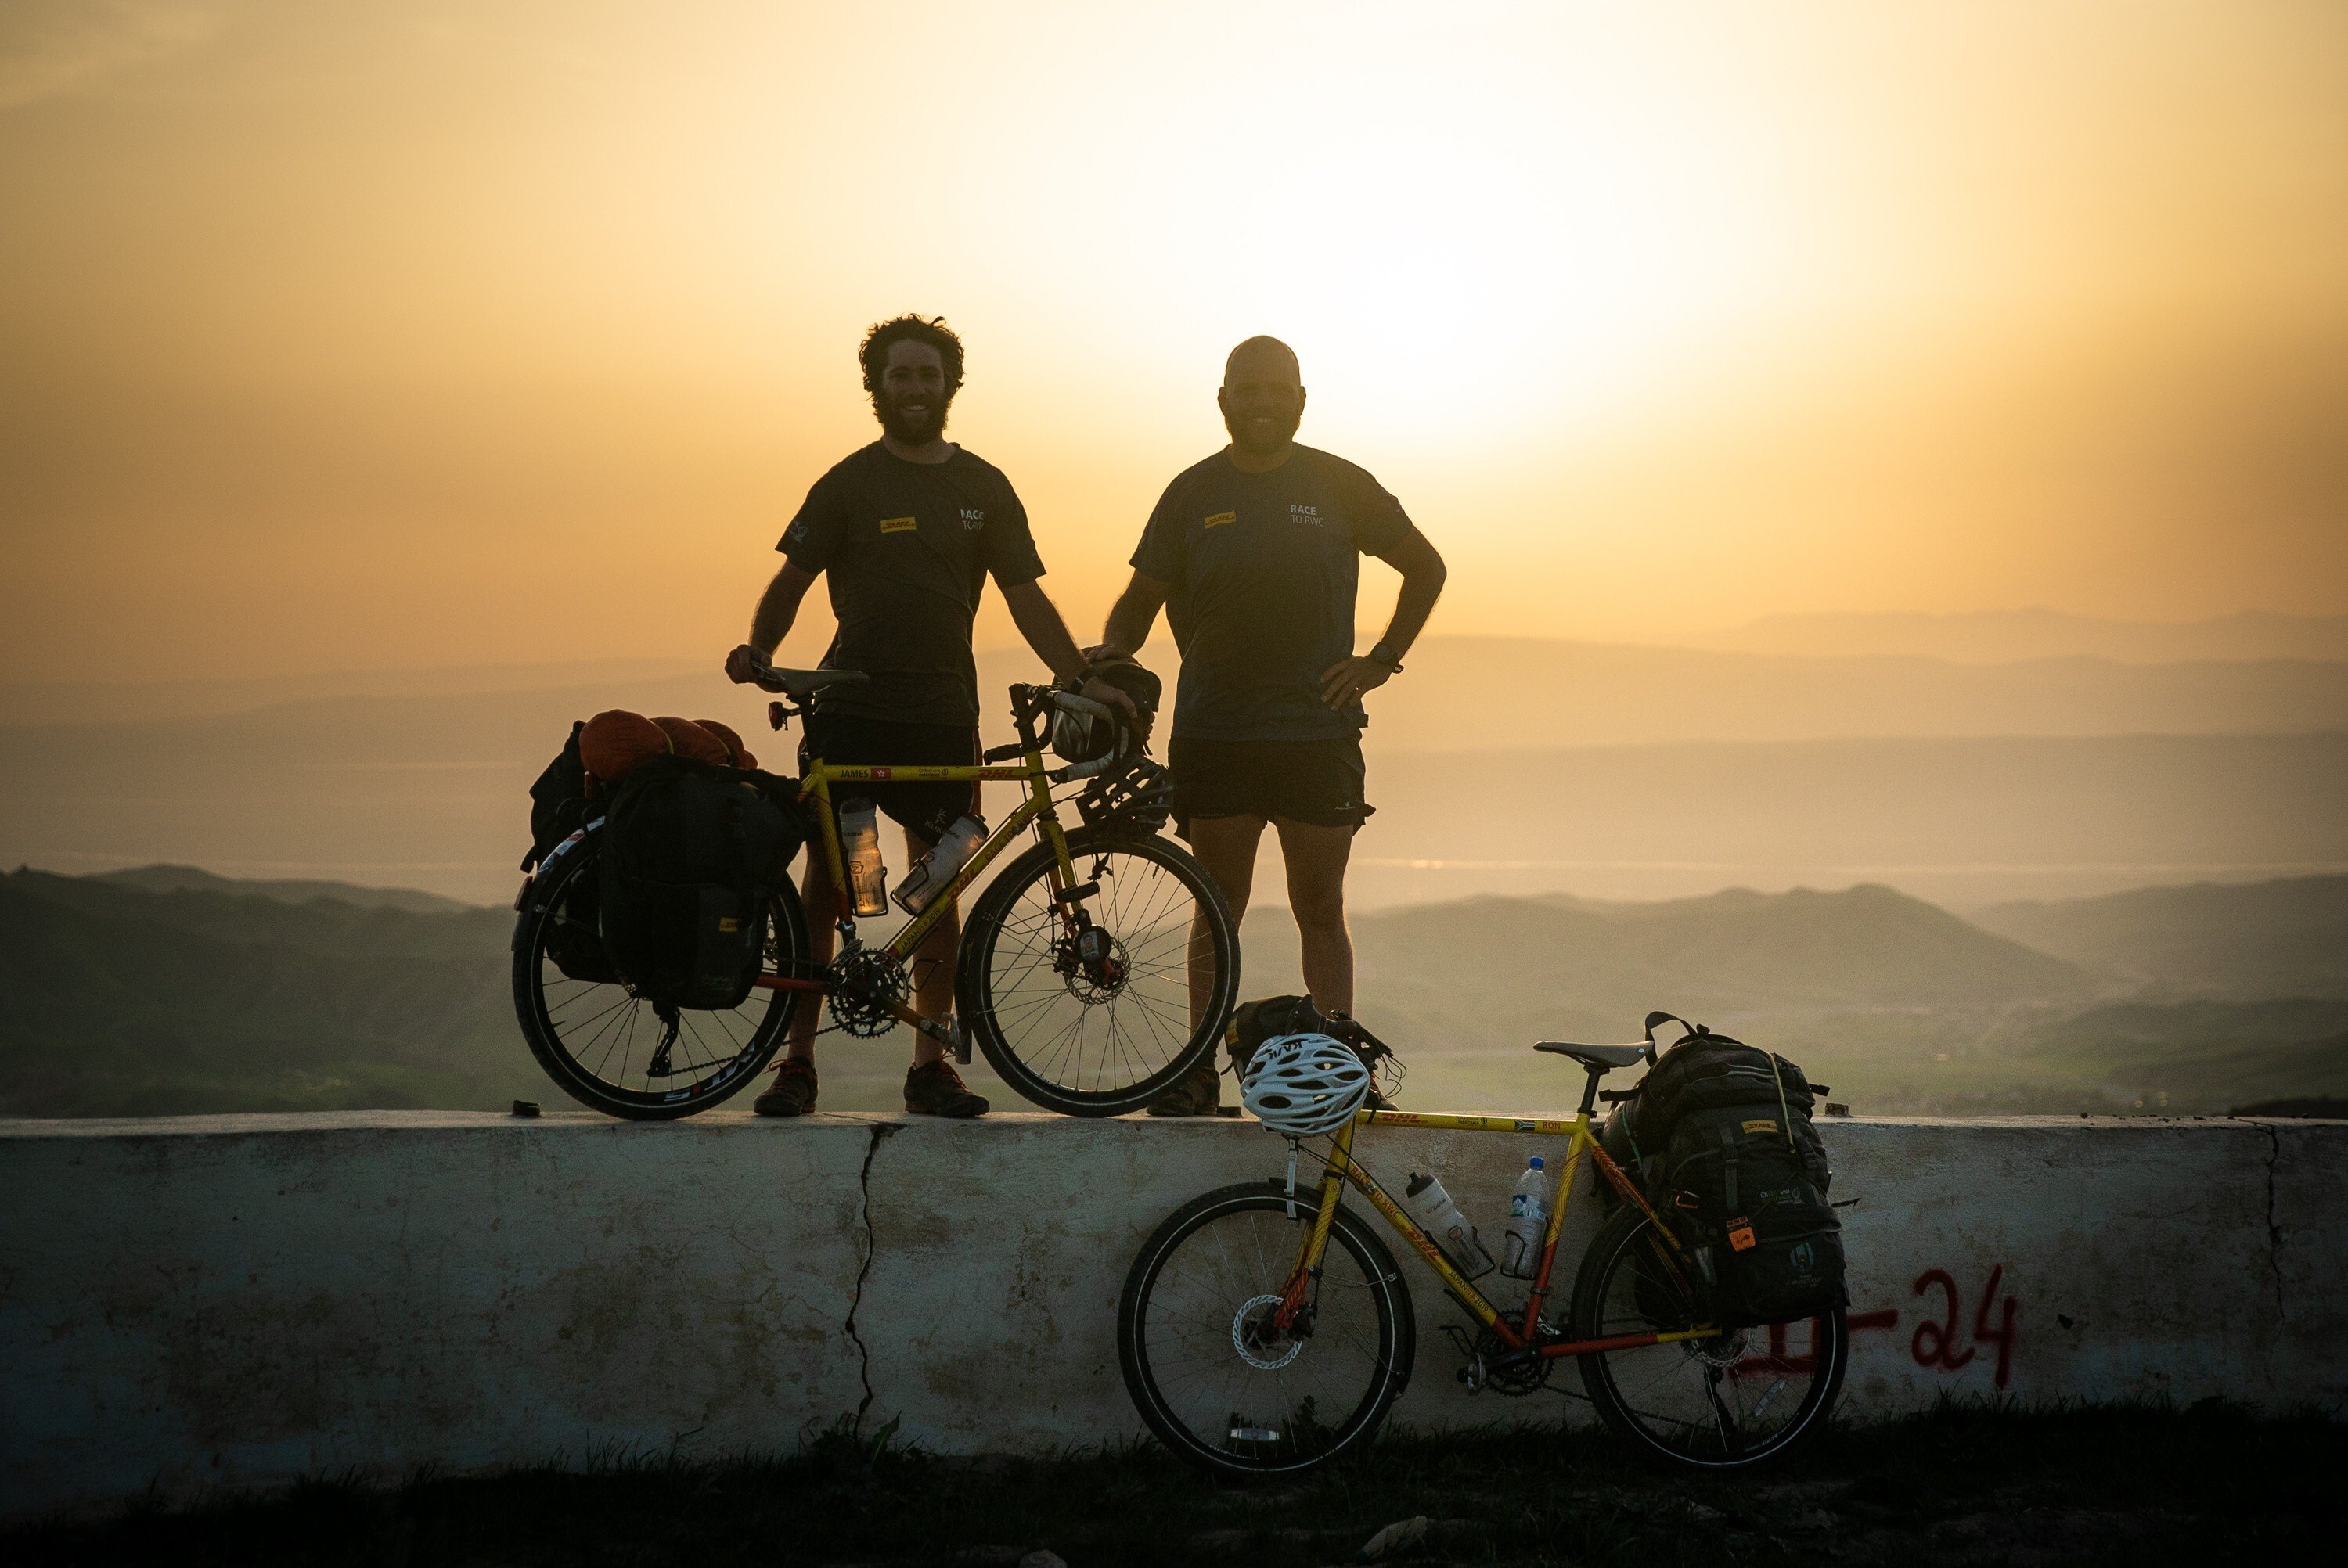 James Owen and Ron Rutland in Tajikistan on their cycle from London to Japan for the Rugby World Cup. Photo: DHL Race to Rugby World Cup